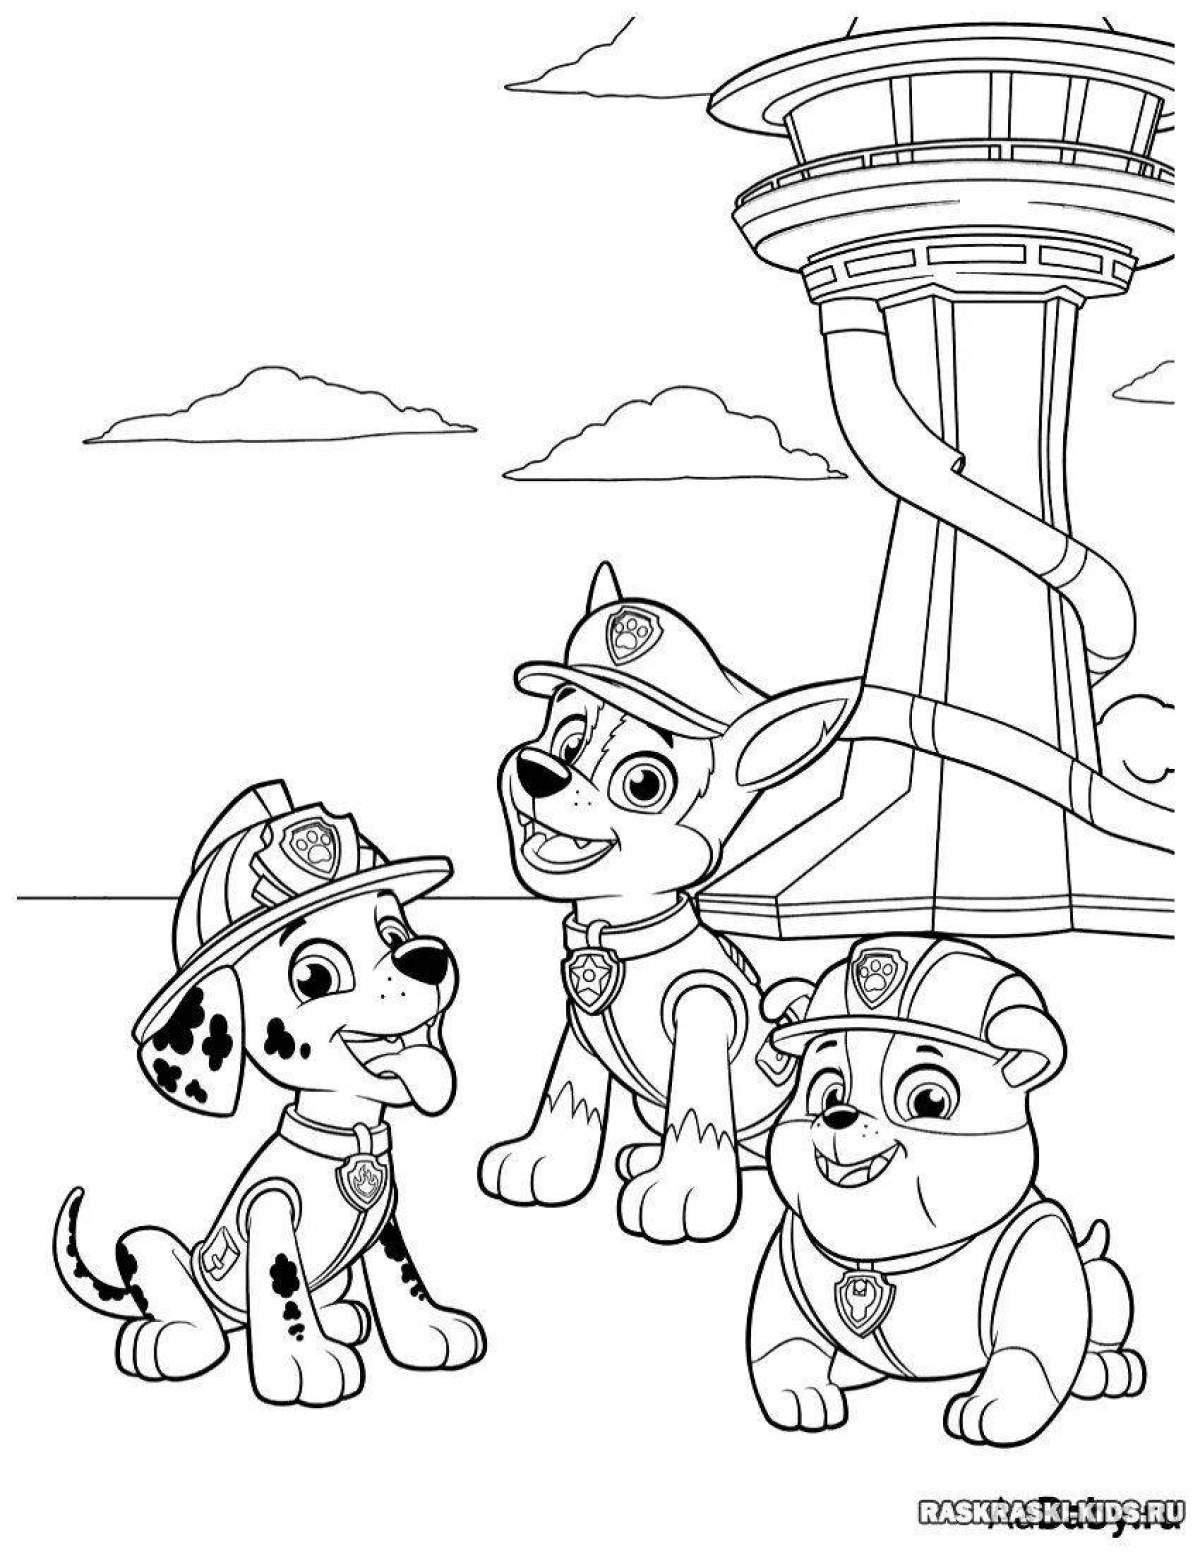 Adorable Paw Patrol Coloring Page for Boys